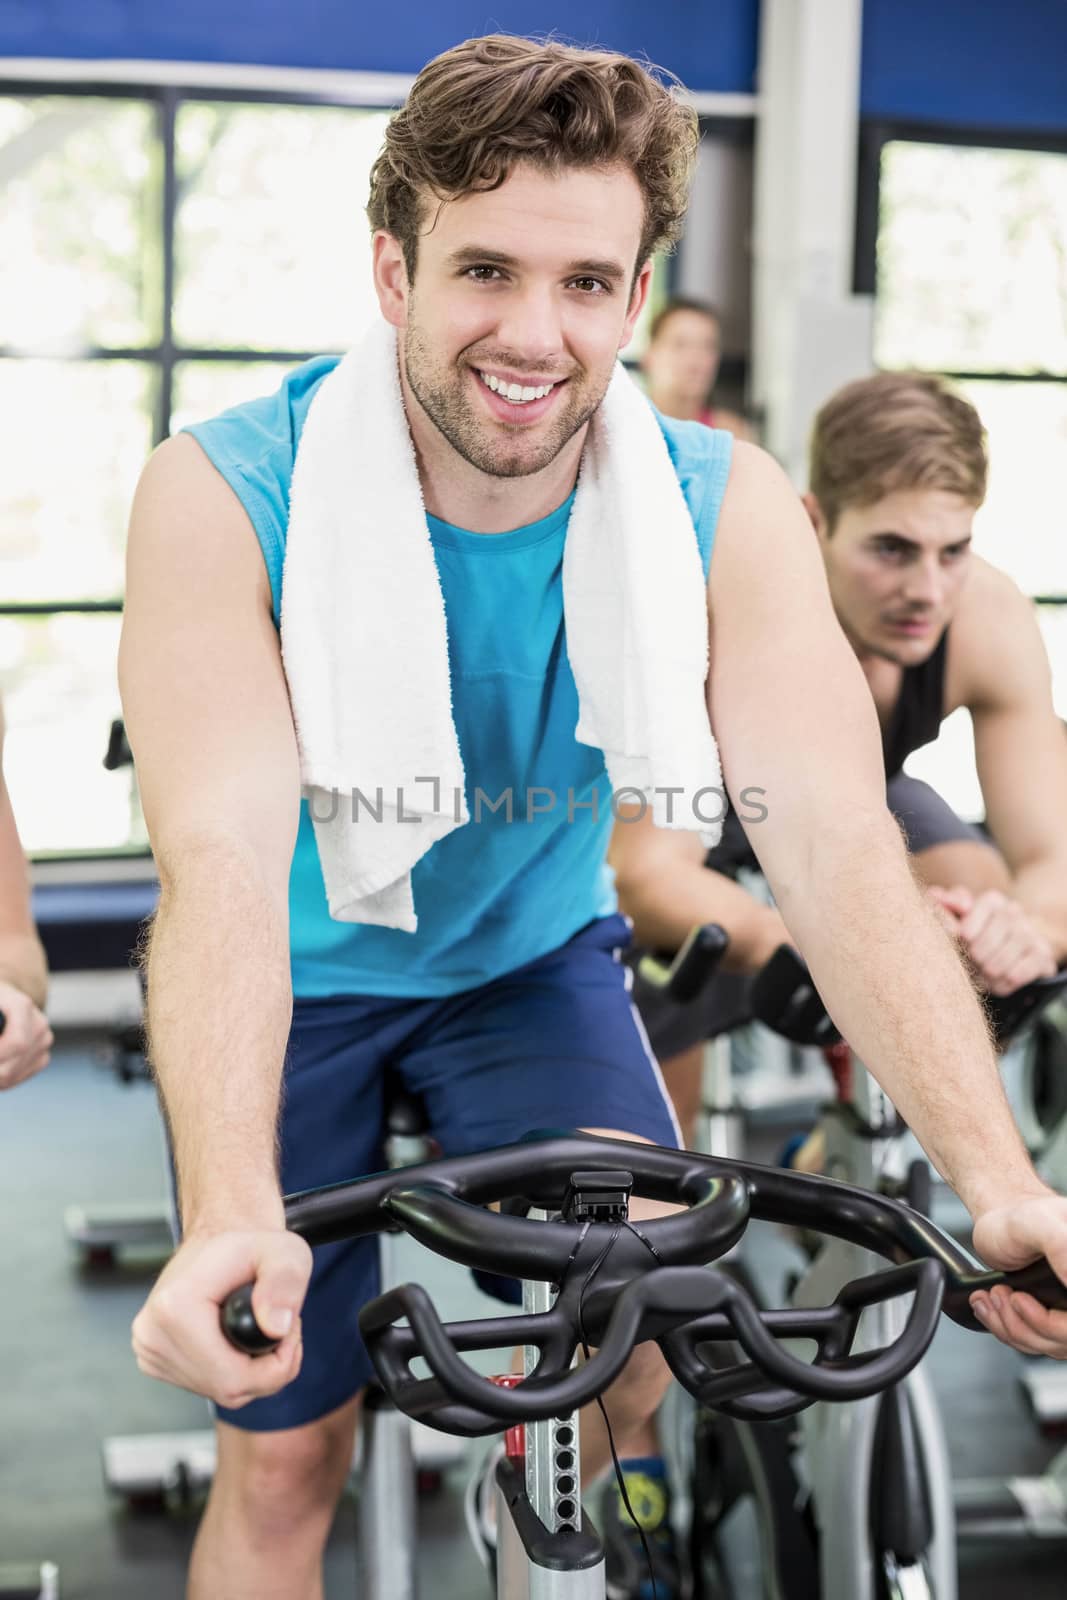 Fit group of people using exercise bike together by Wavebreakmedia